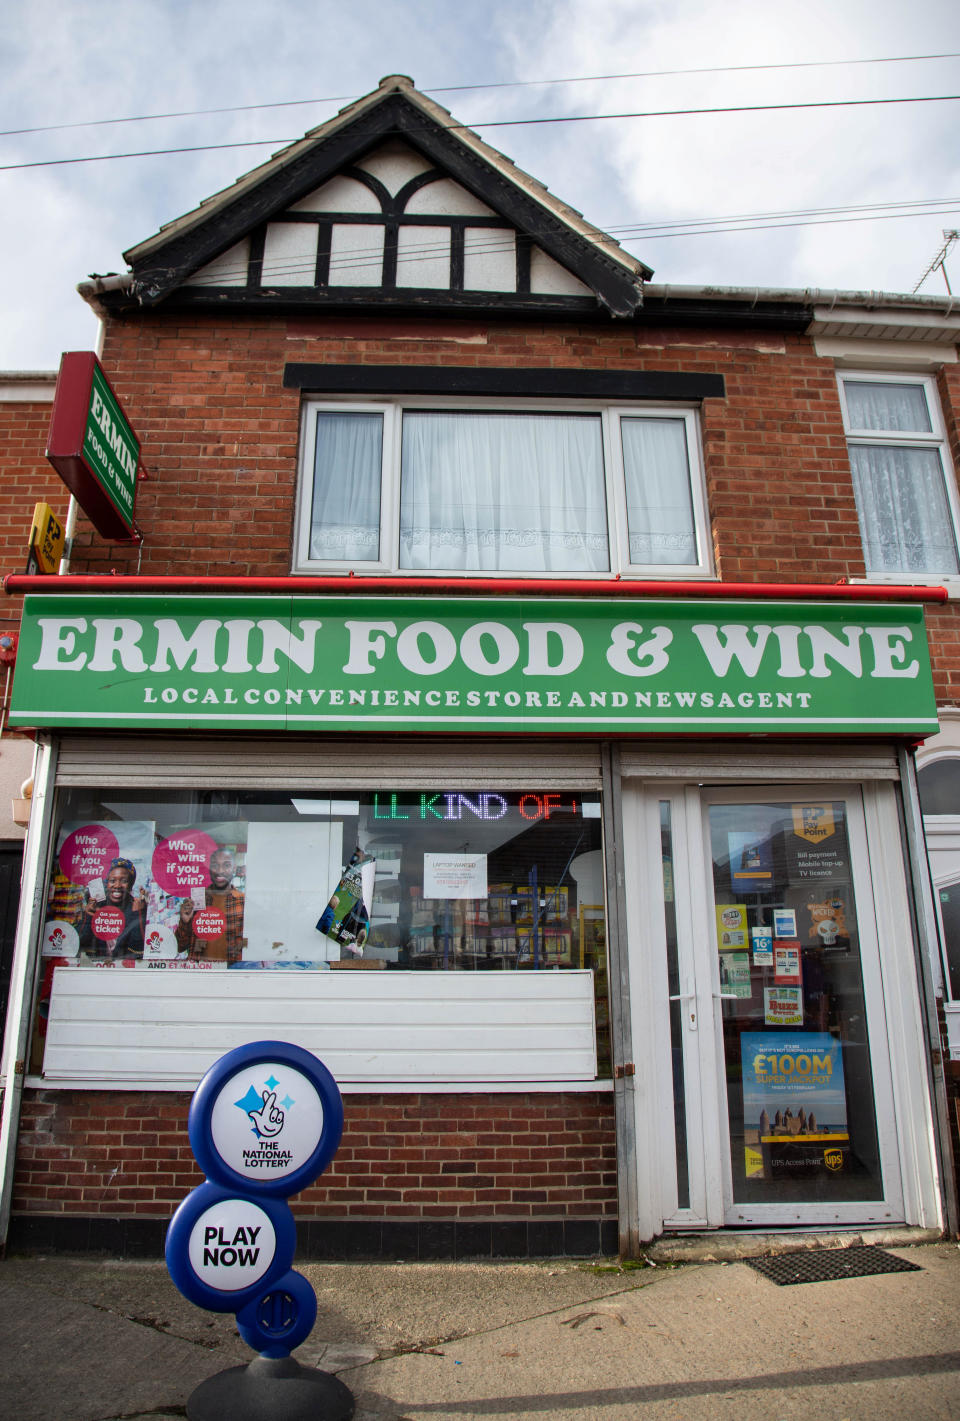 The attempted robbery happened at Ermin Food and Wine in Swindon. (SWNS)